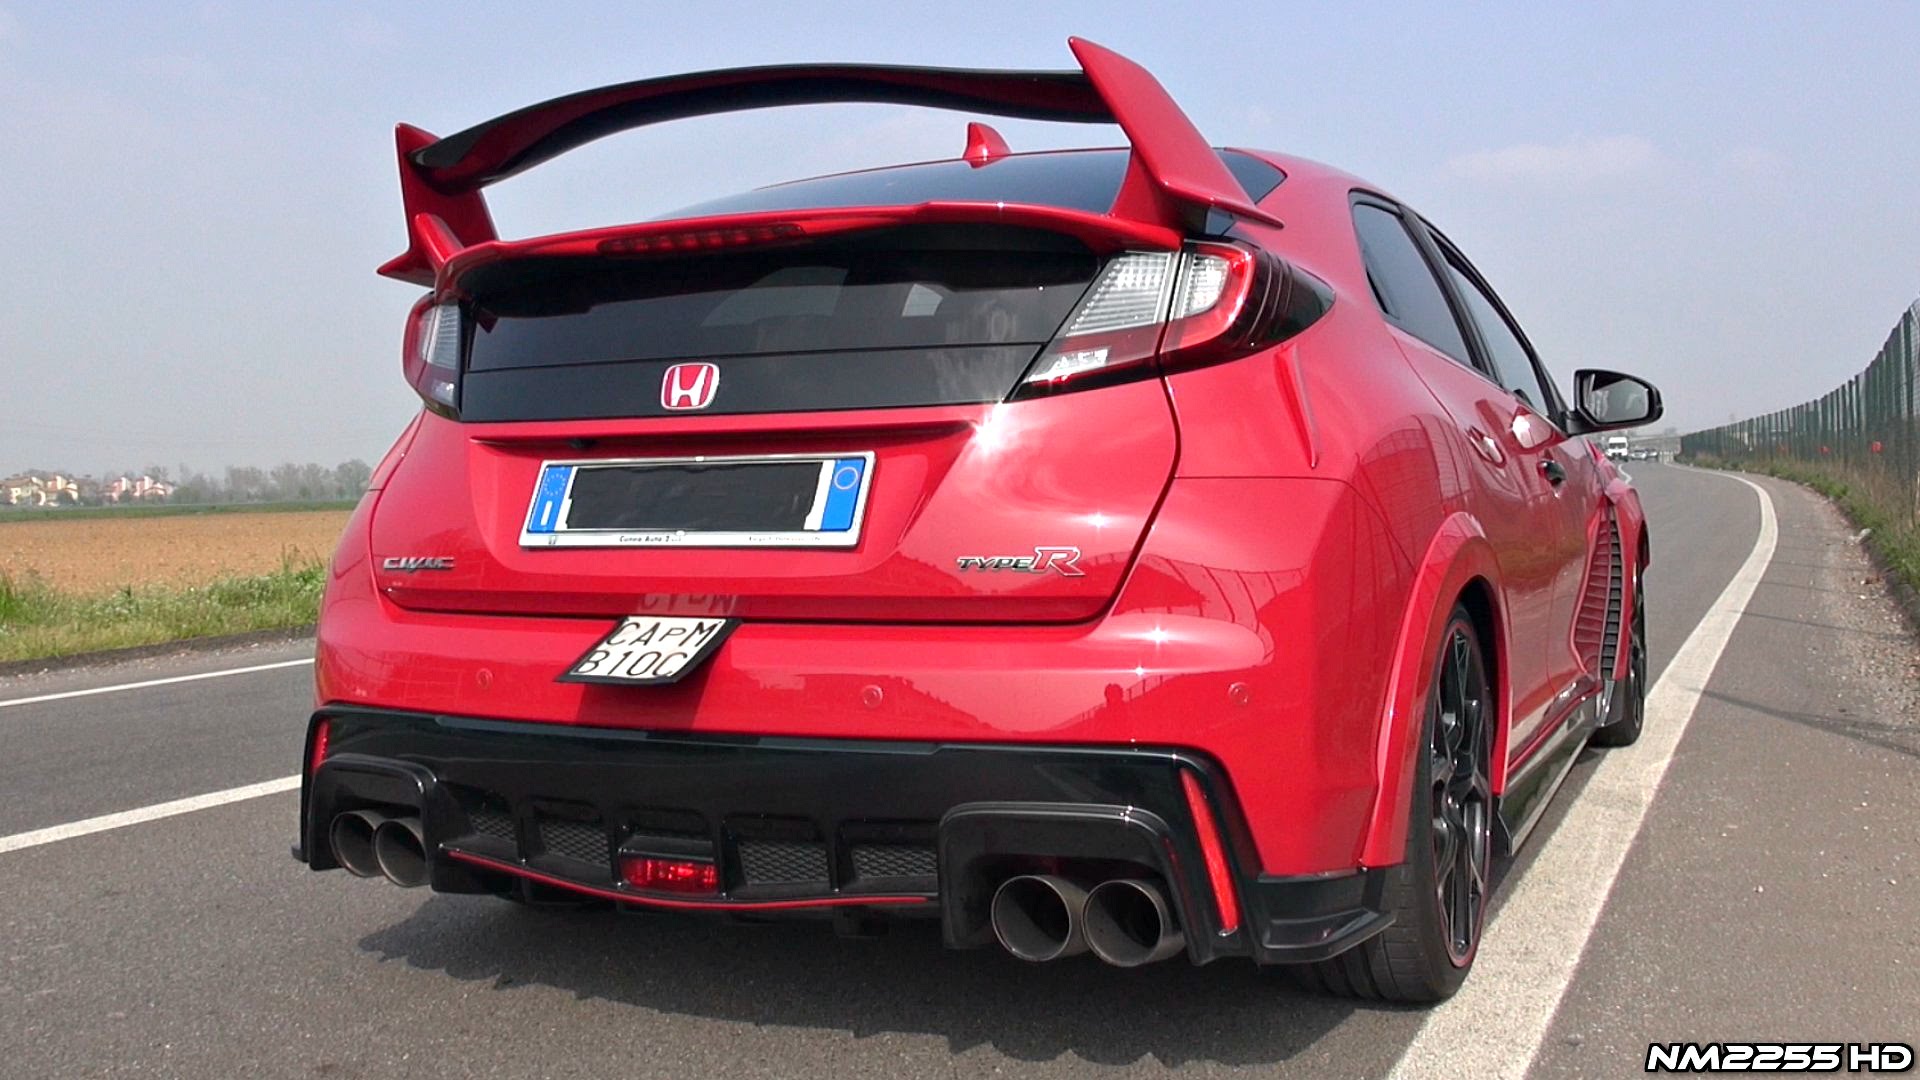 Amazing Honda Civic Type R Pictures & Backgrounds